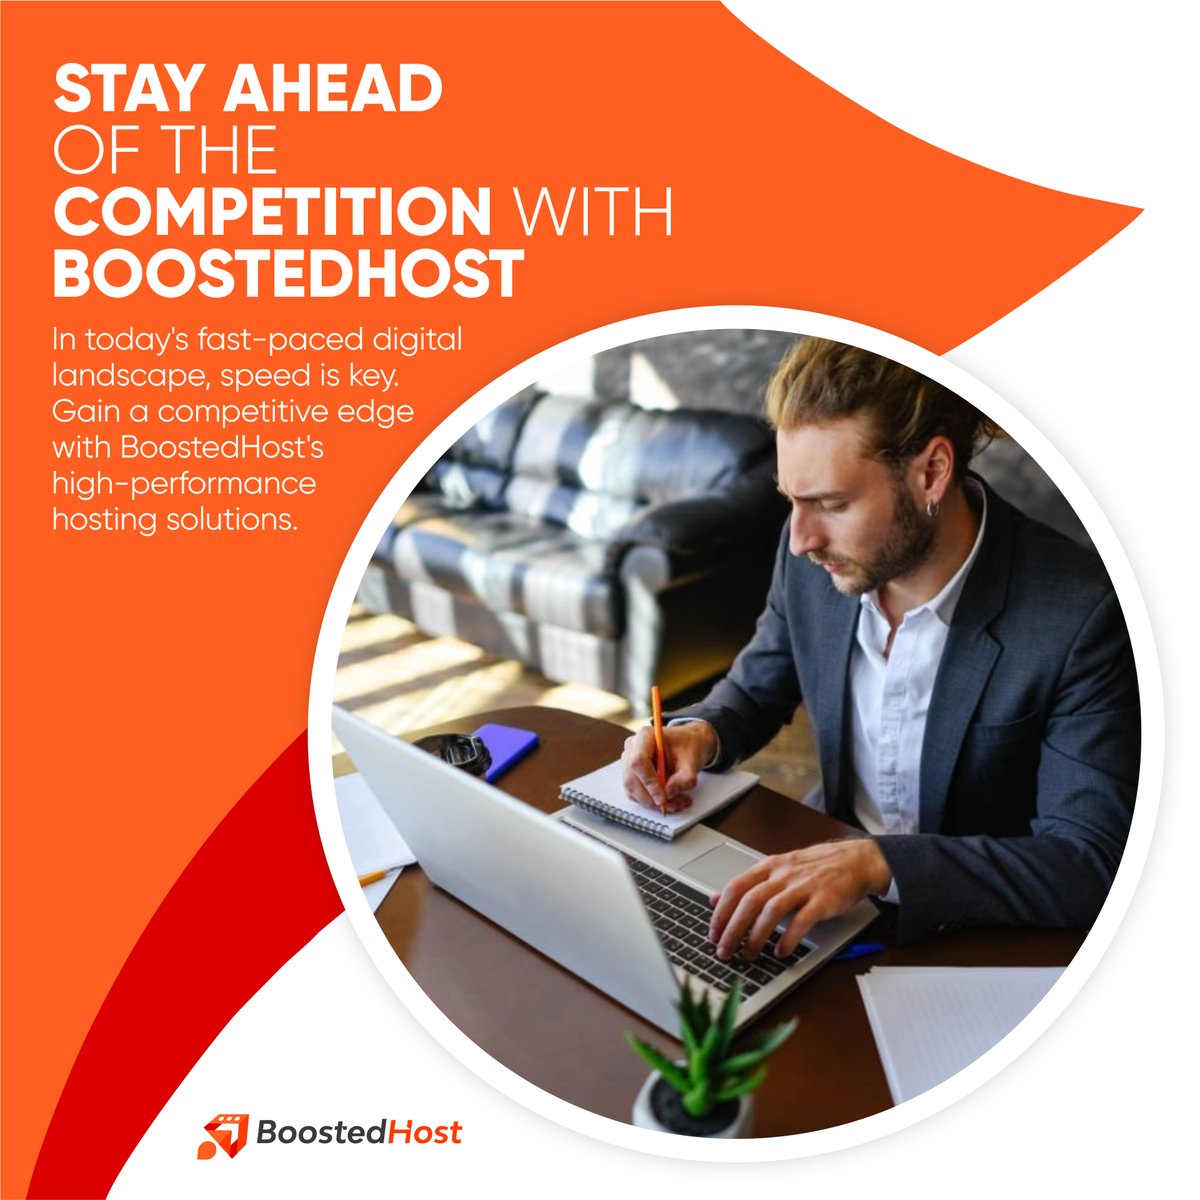 'In today's fast-paced digital landscape, speed is key. Gain a competitive edge with BoostedHost's high-performance hosting solutions. Don't let slow loading times hold you back. Accelerate your success! ⚡️ 
---
🌐 boostedhost.com

#BoostedHost #DigitalAdvantage